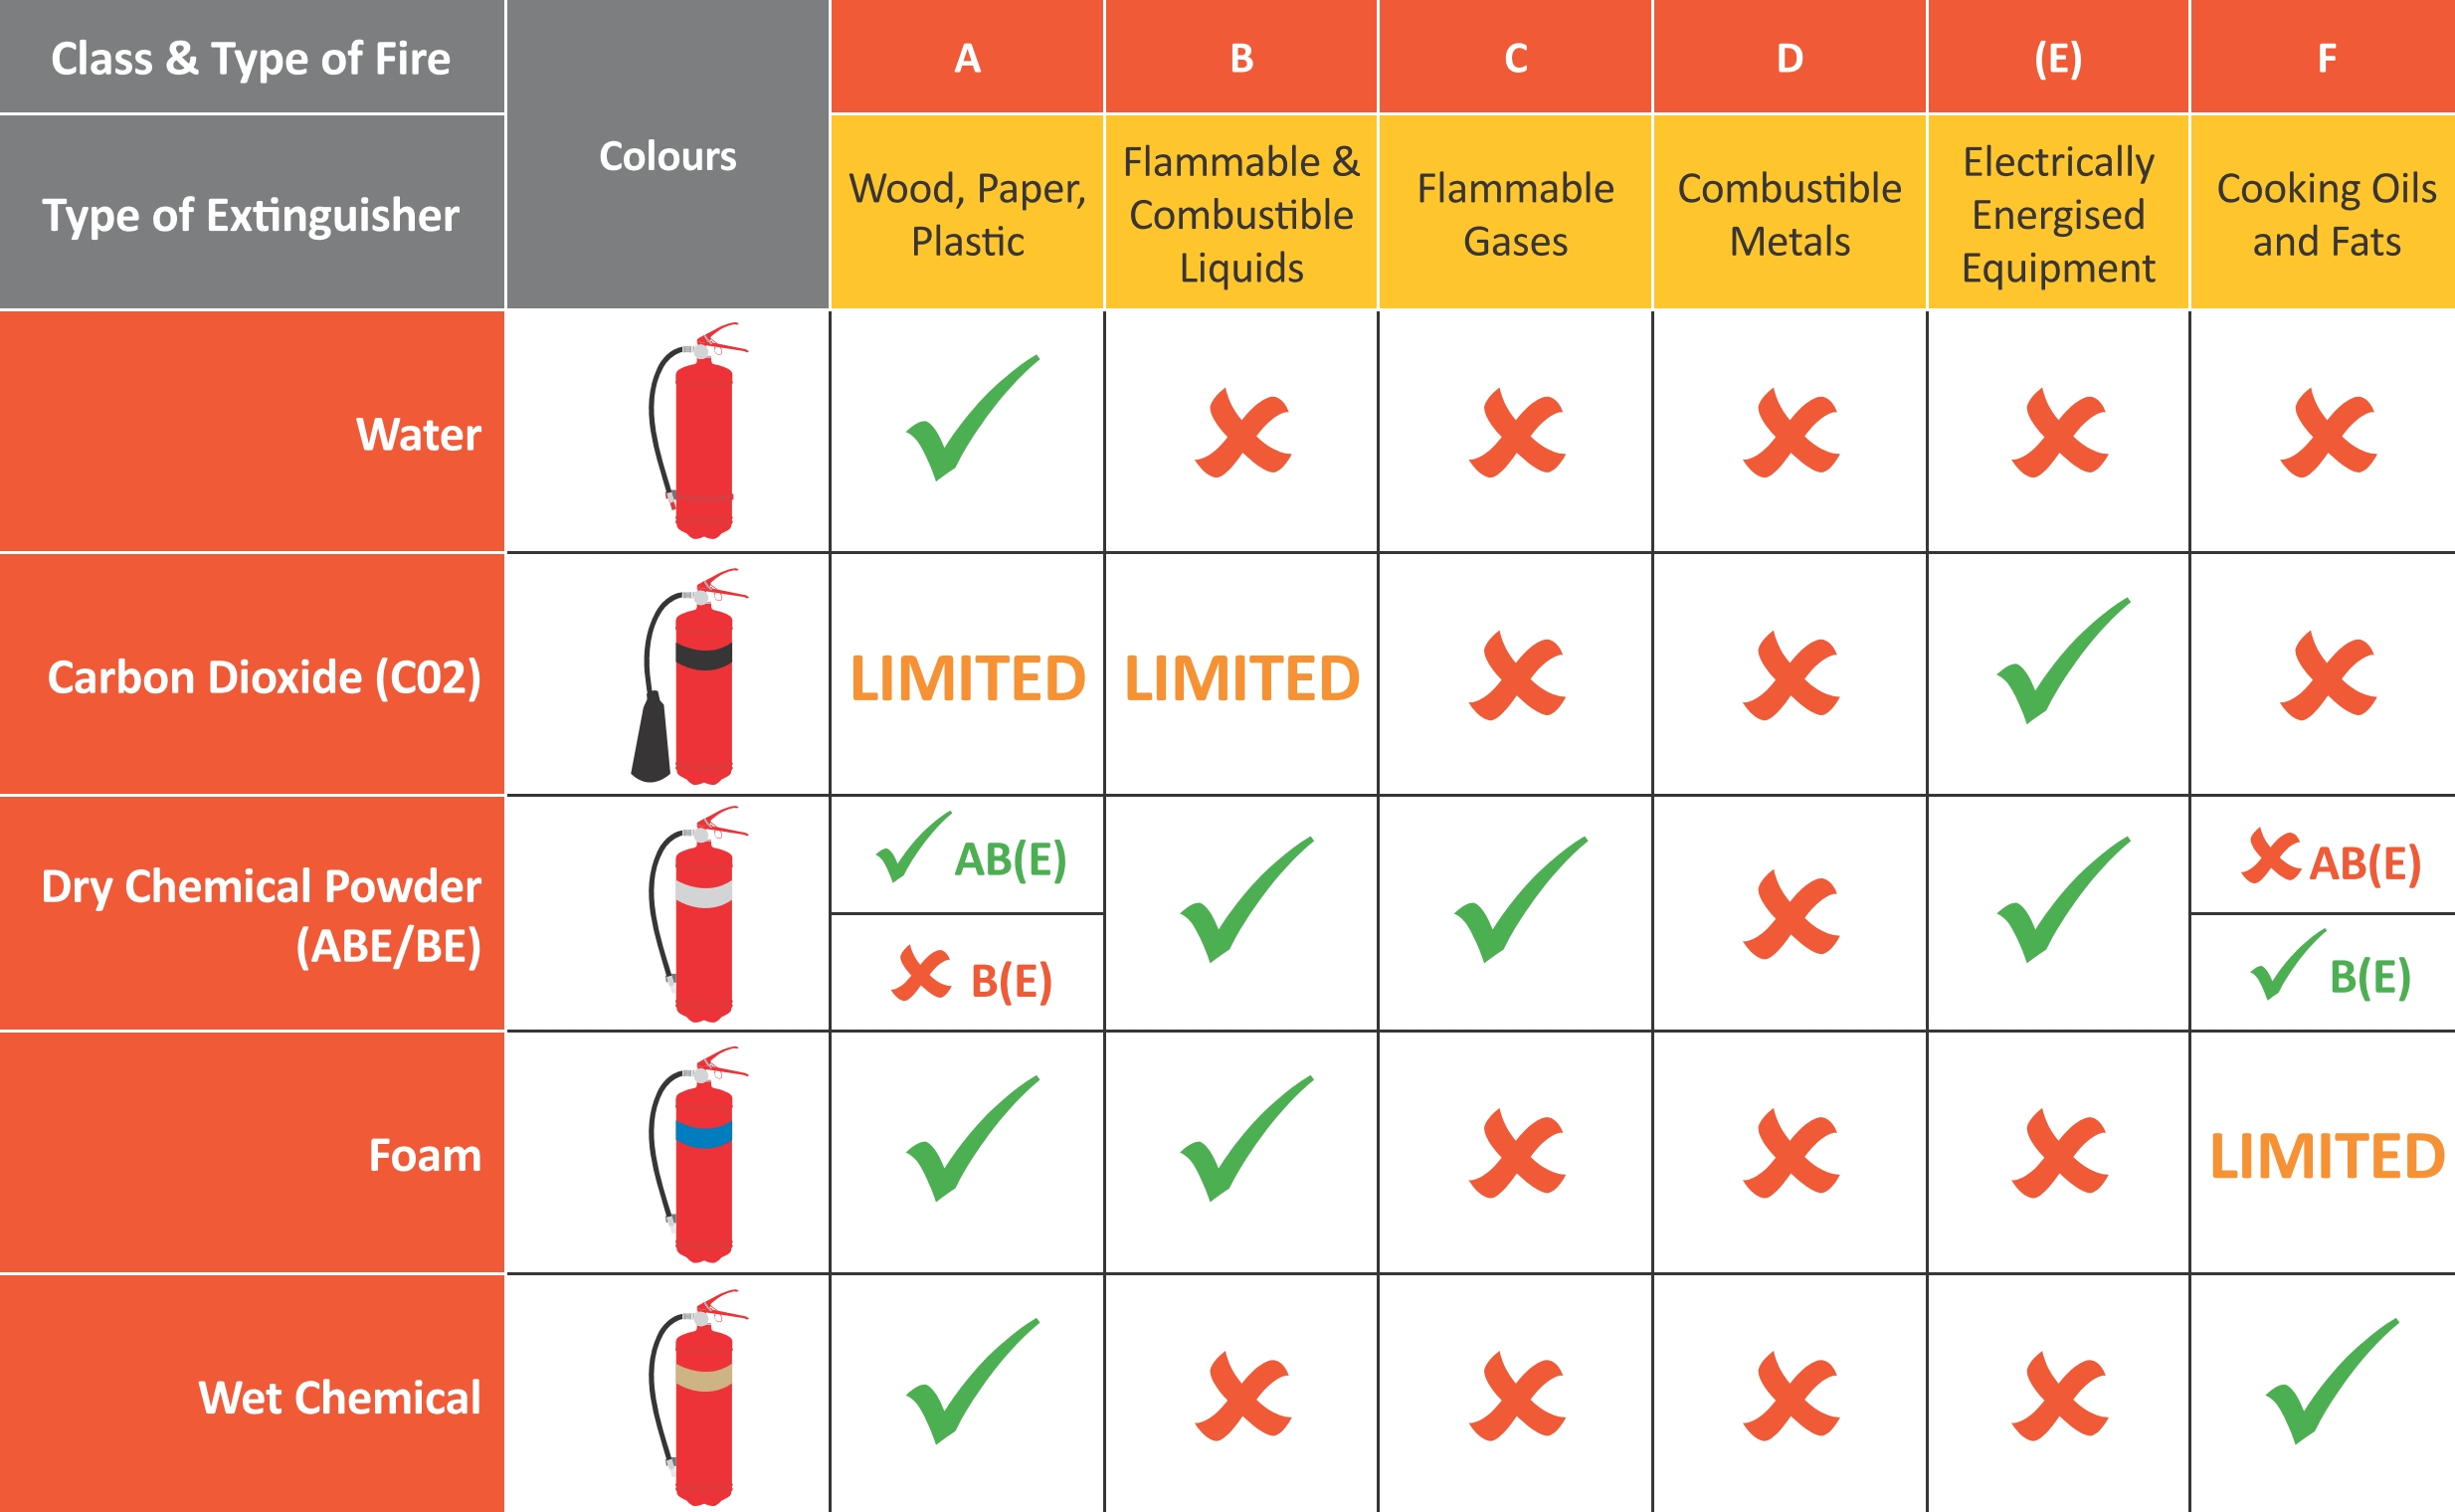 Table explaining the use for each type of fire extinguisher that Guardian First Aid & Fire Safety Services provide for servicing, replenishing & selling.